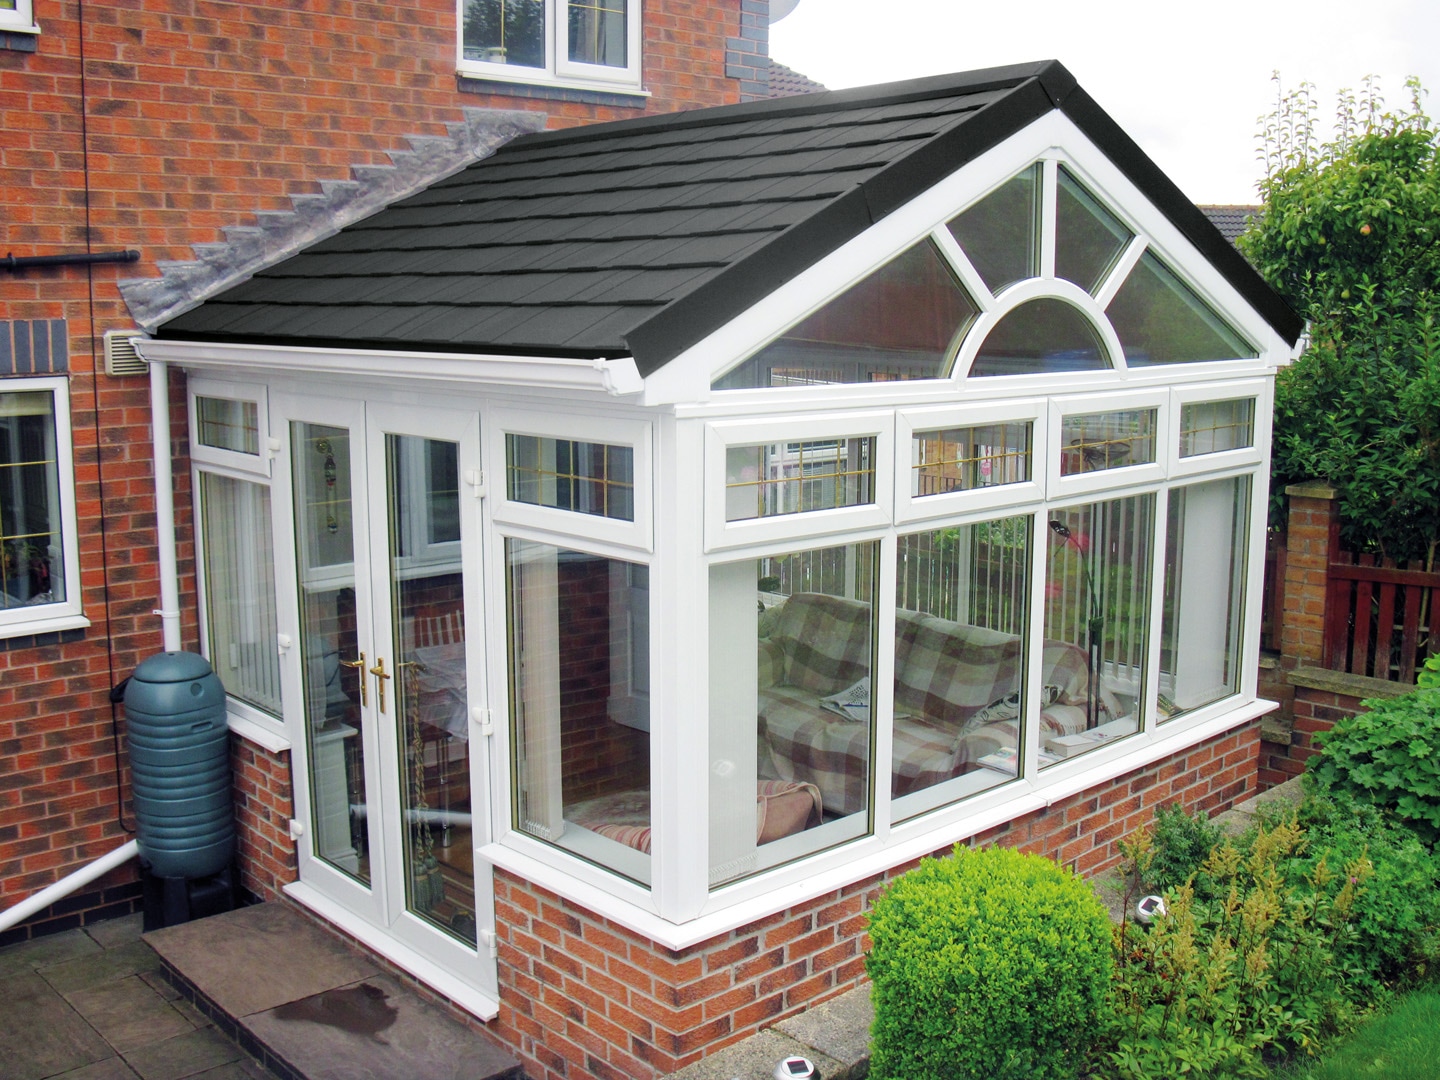 Modern tiled conservatory roof by Enhance Conservatories with a skylight, providing a seamless integration with the existing brick house, offering a blend of traditional aesthetics and contemporary design to enhance natural light and indoor comfort